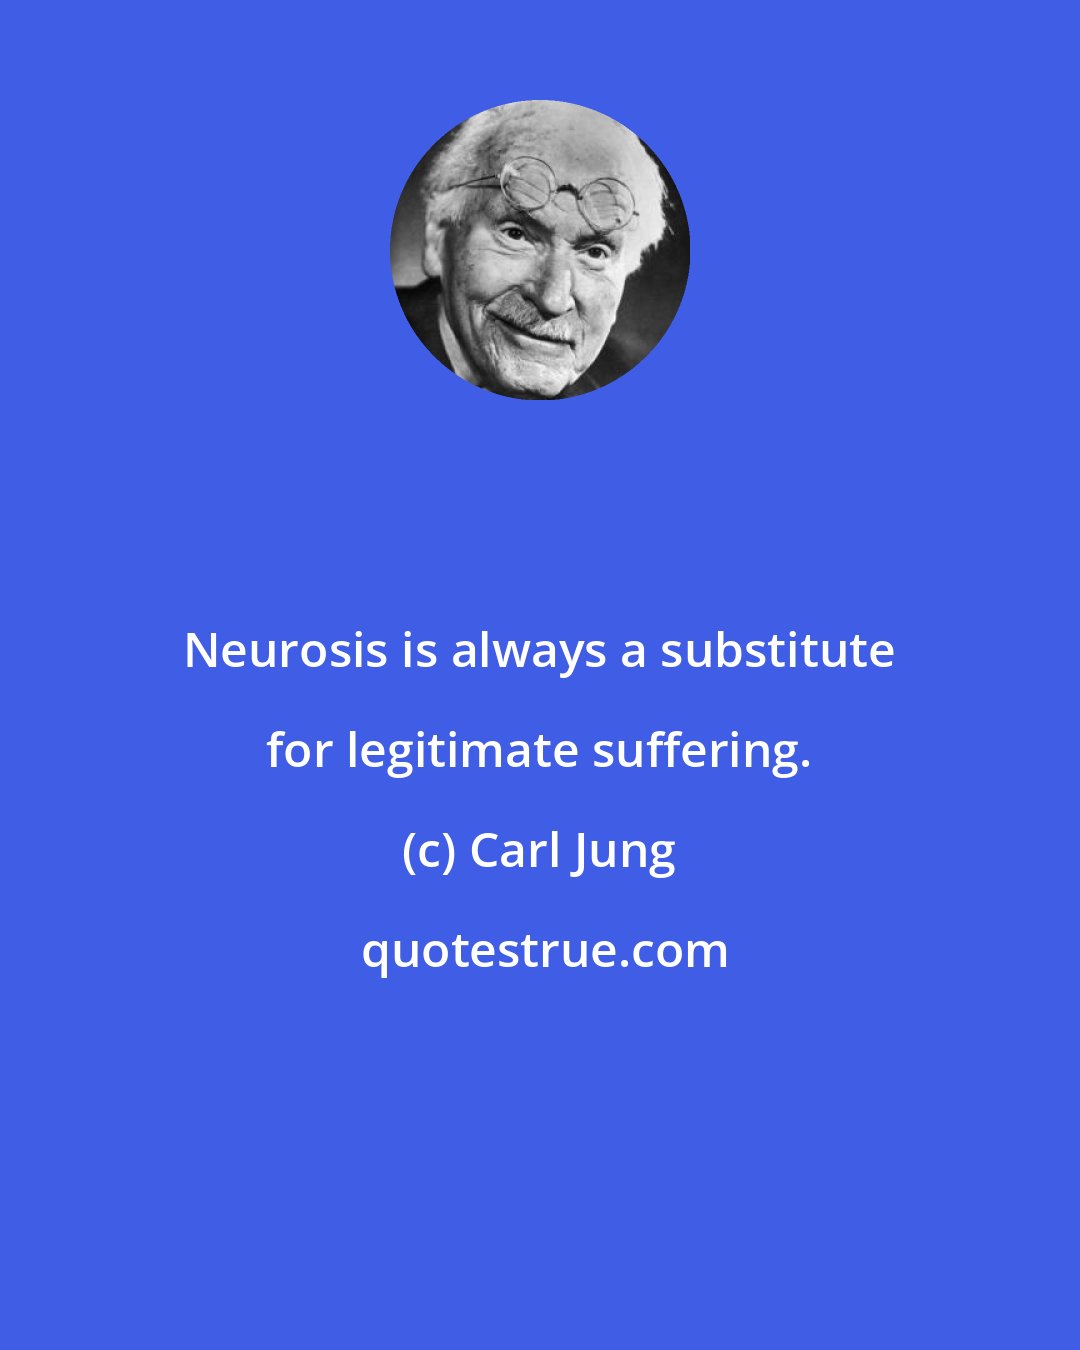 Carl Jung: Neurosis is always a substitute for legitimate suffering.